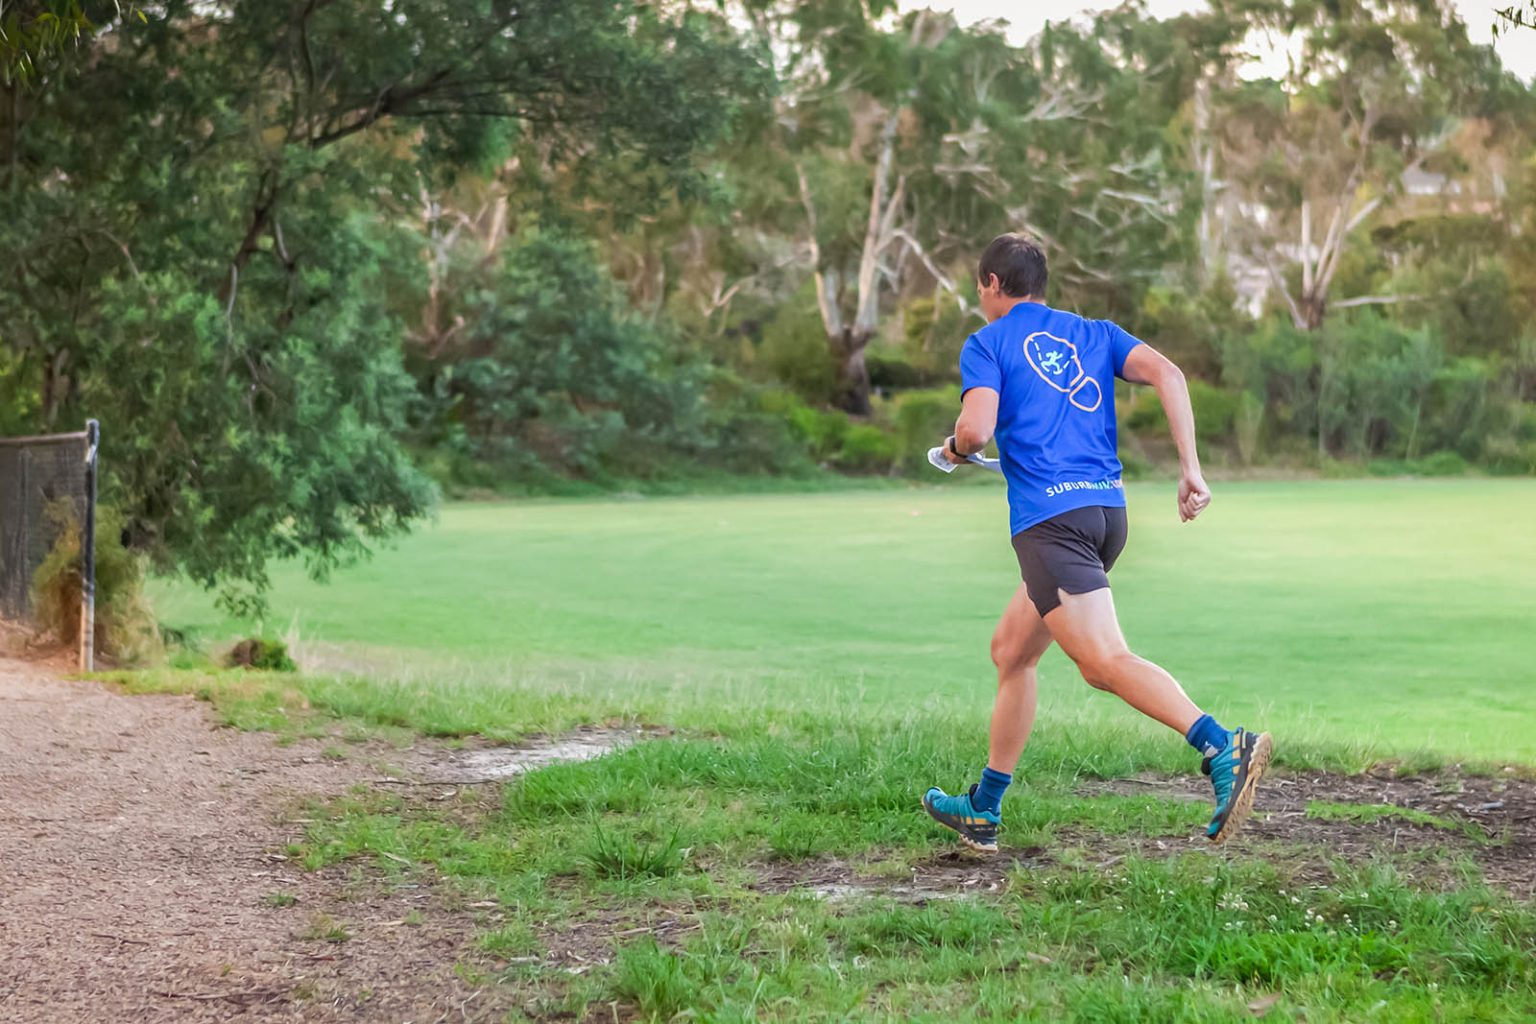 Competitor heading out on a course in a Melbourne park/street orienteering event. A well-planned strategy is in place to optimise the number of controls visited! Photo by Frankie